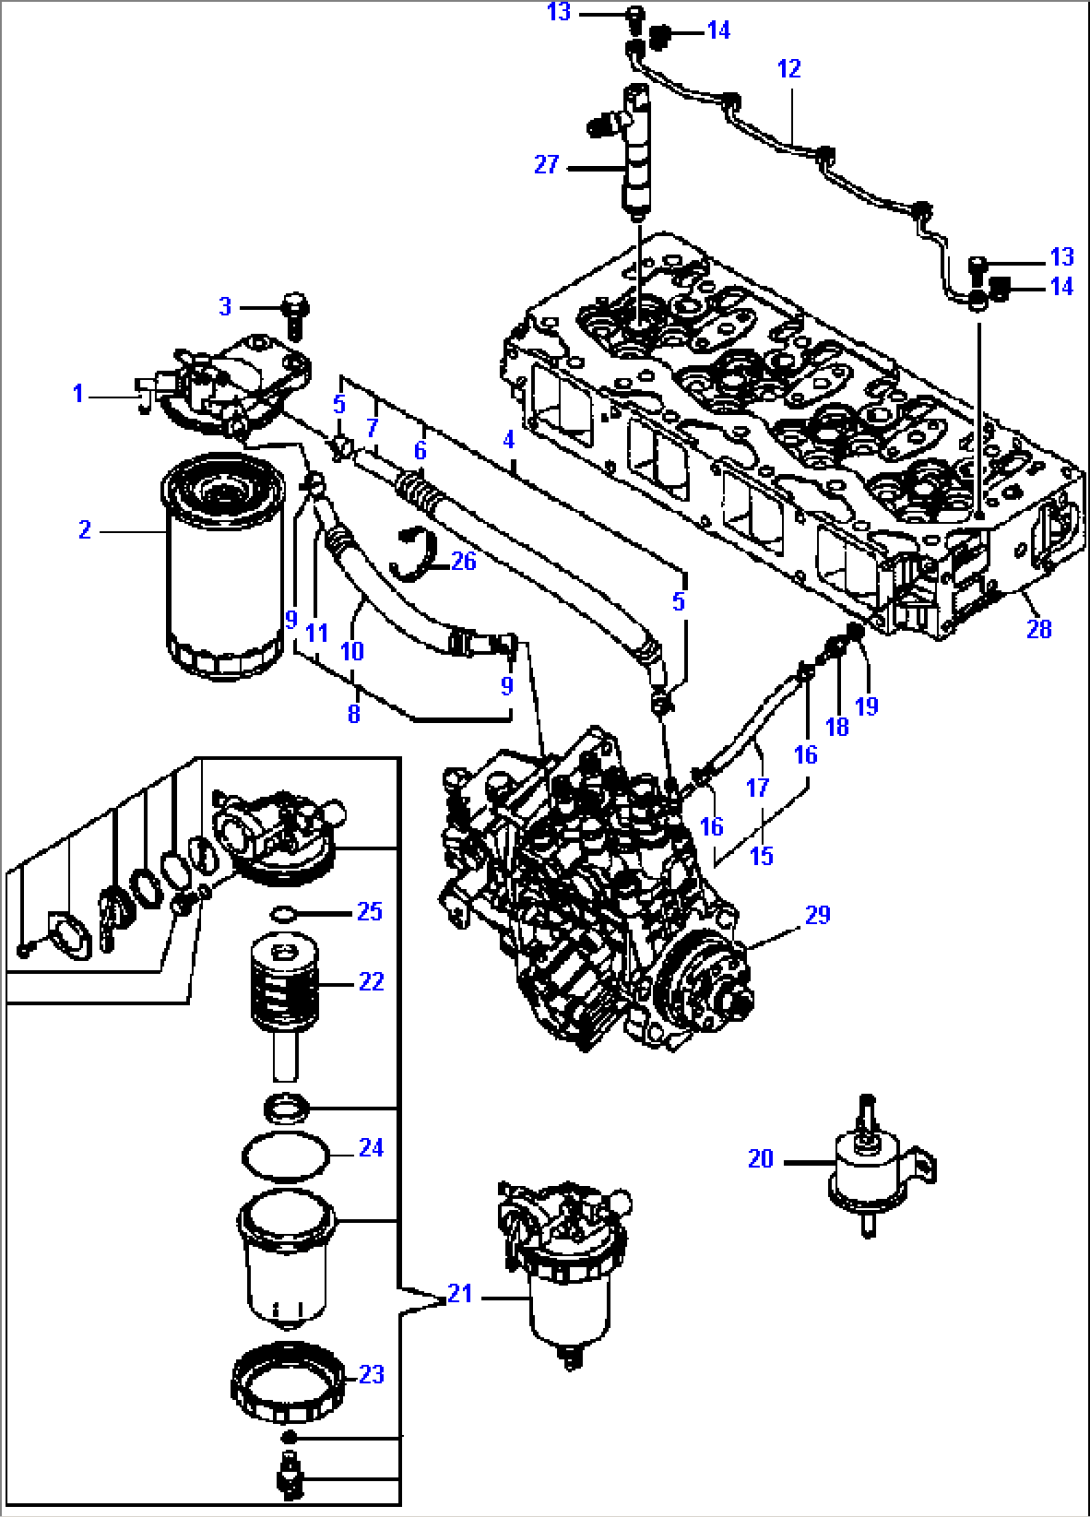 A0120-0410 ENGINE FUEL PIPING